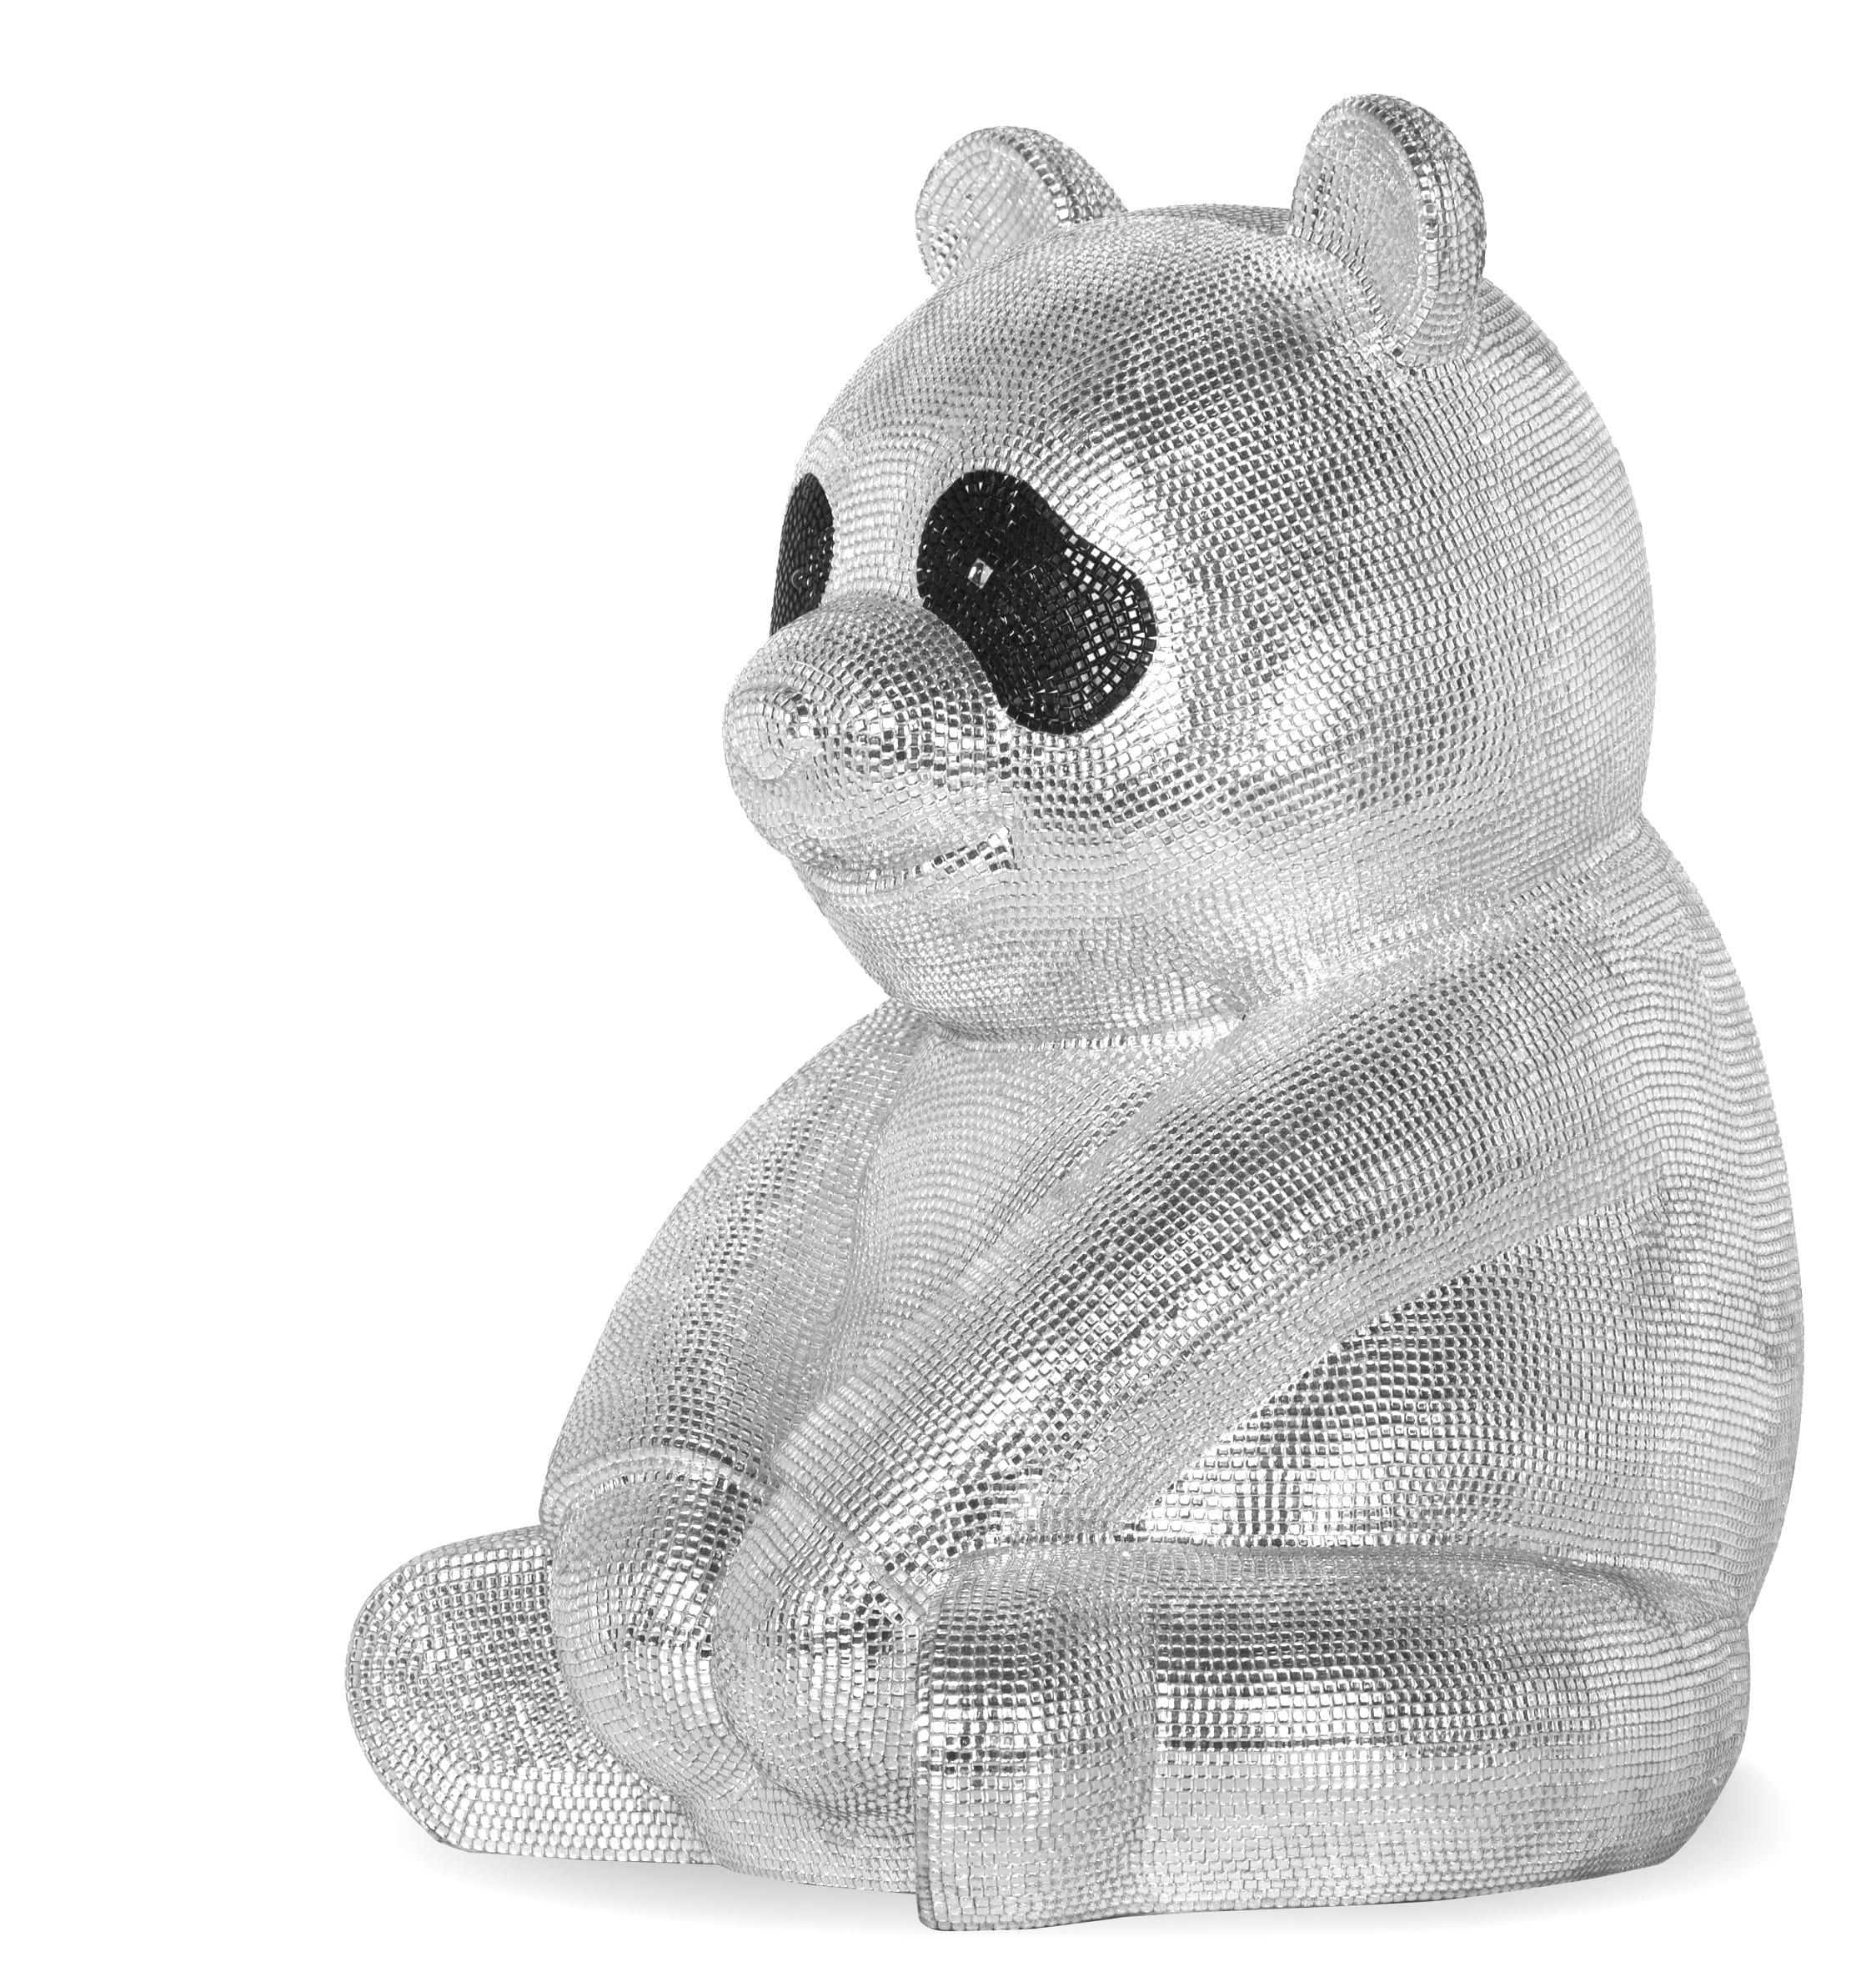 A Pandasan's Lustrous Charm :  Argentum Radiance - Contemporary Sculpture by HIRO ANDO